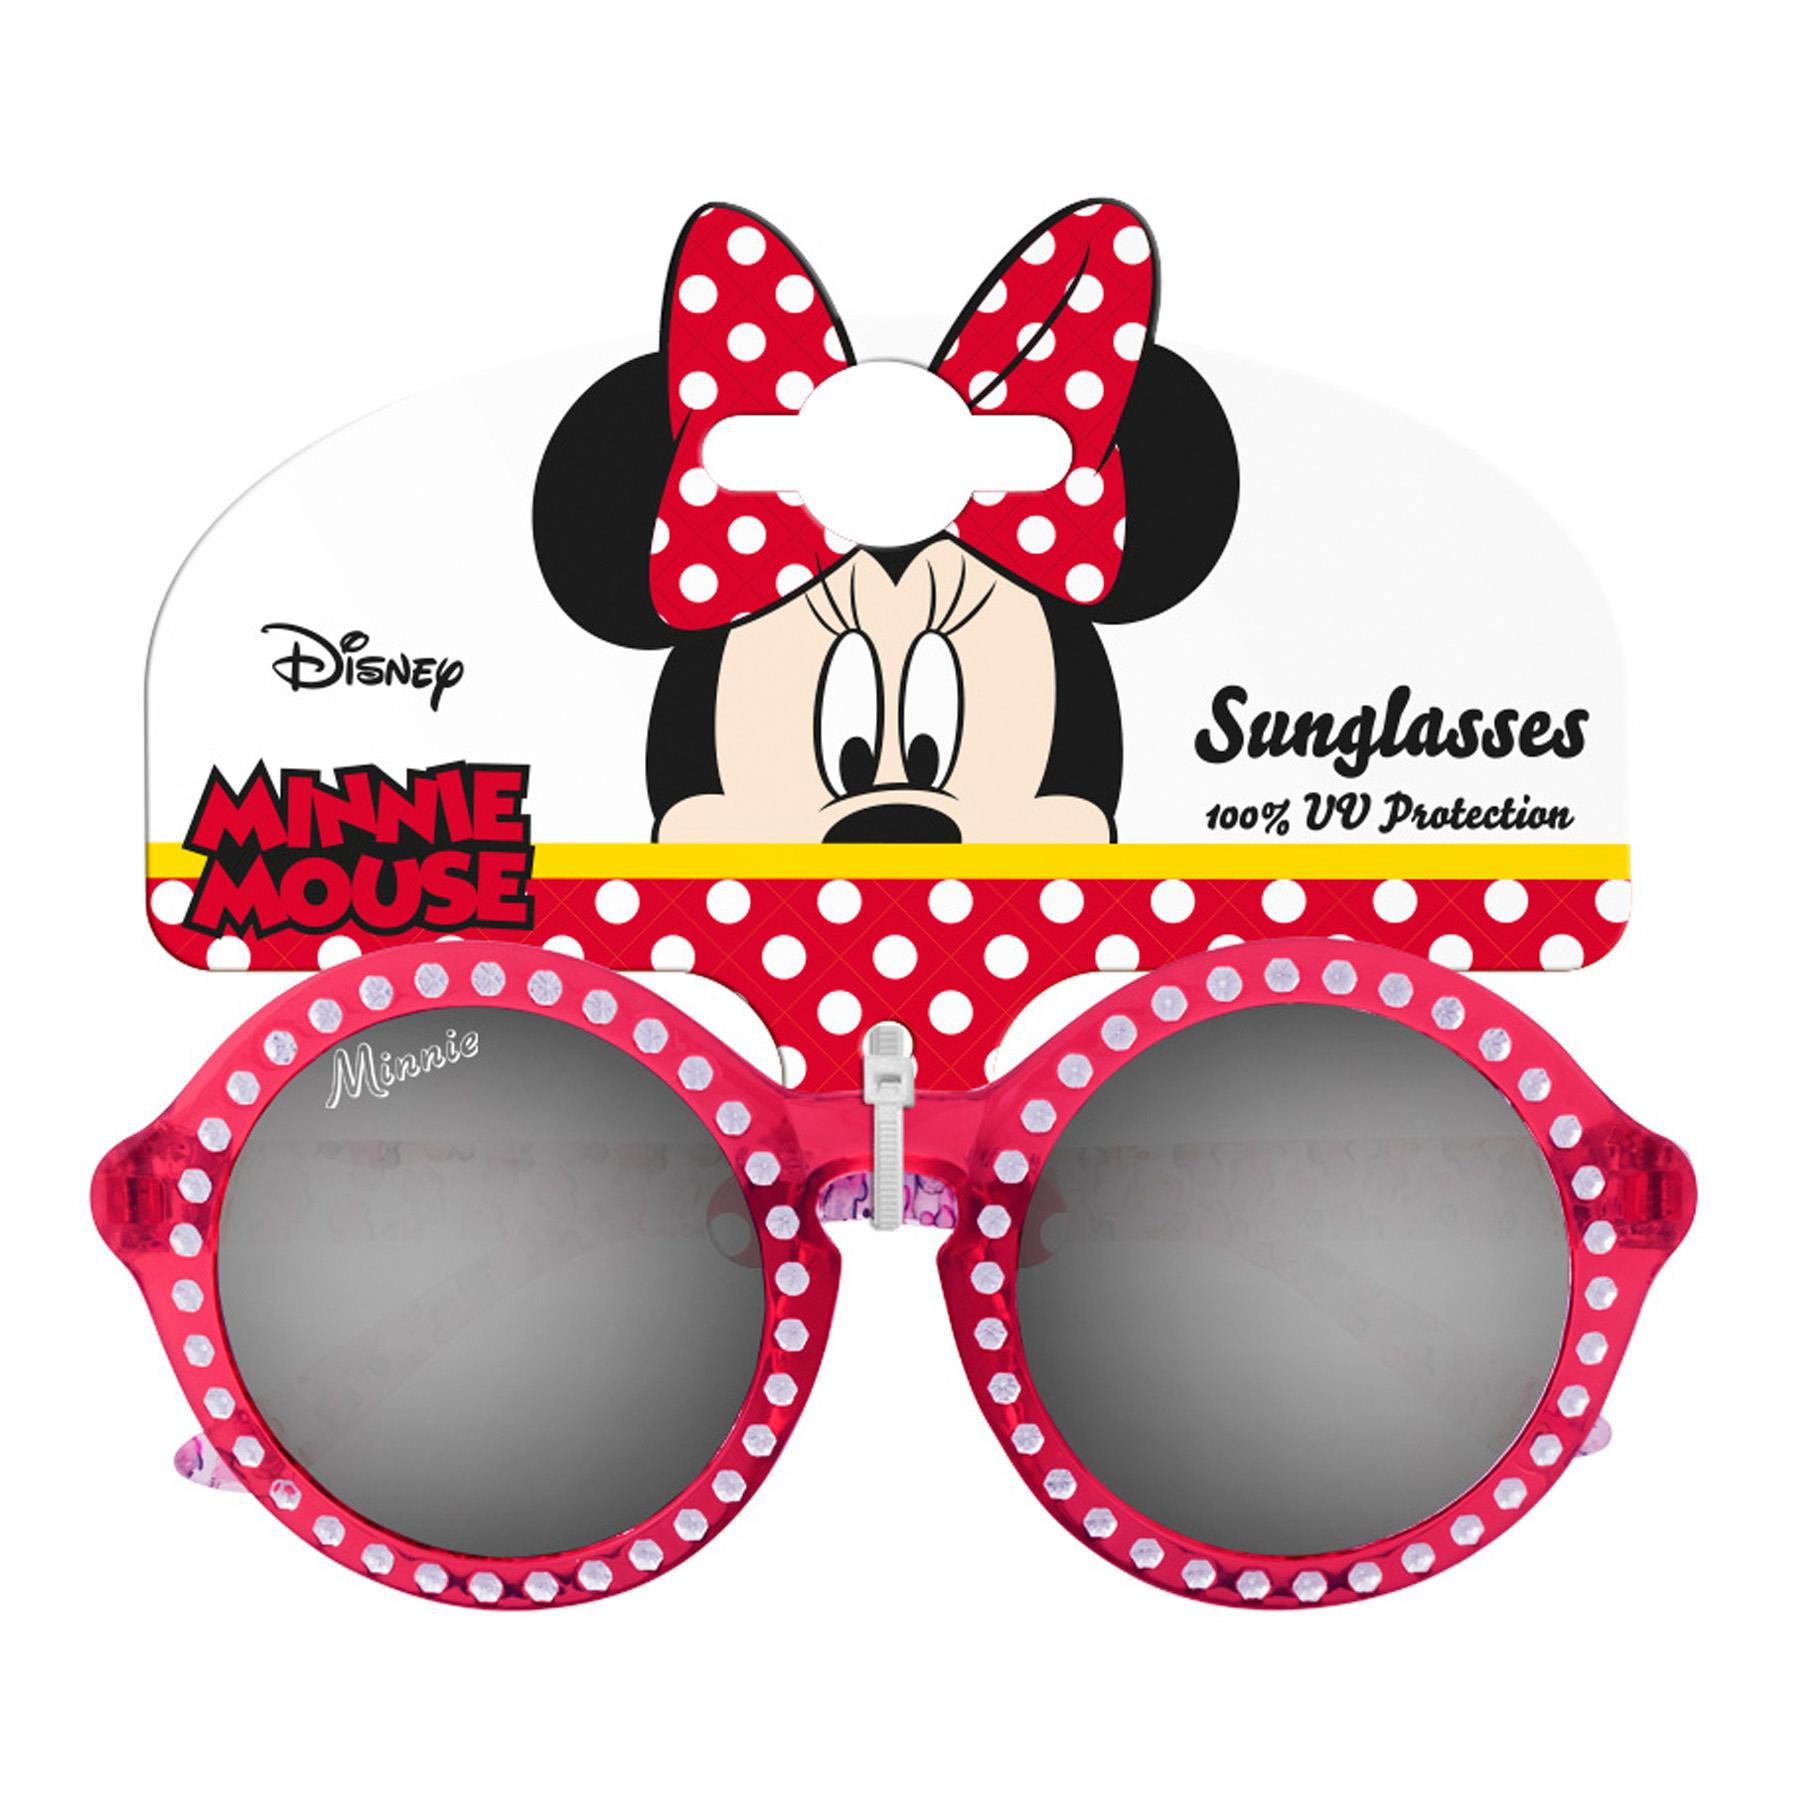 Disney Minnie Mouse Children's Sunglasses UV protection for Holiday - MIN29